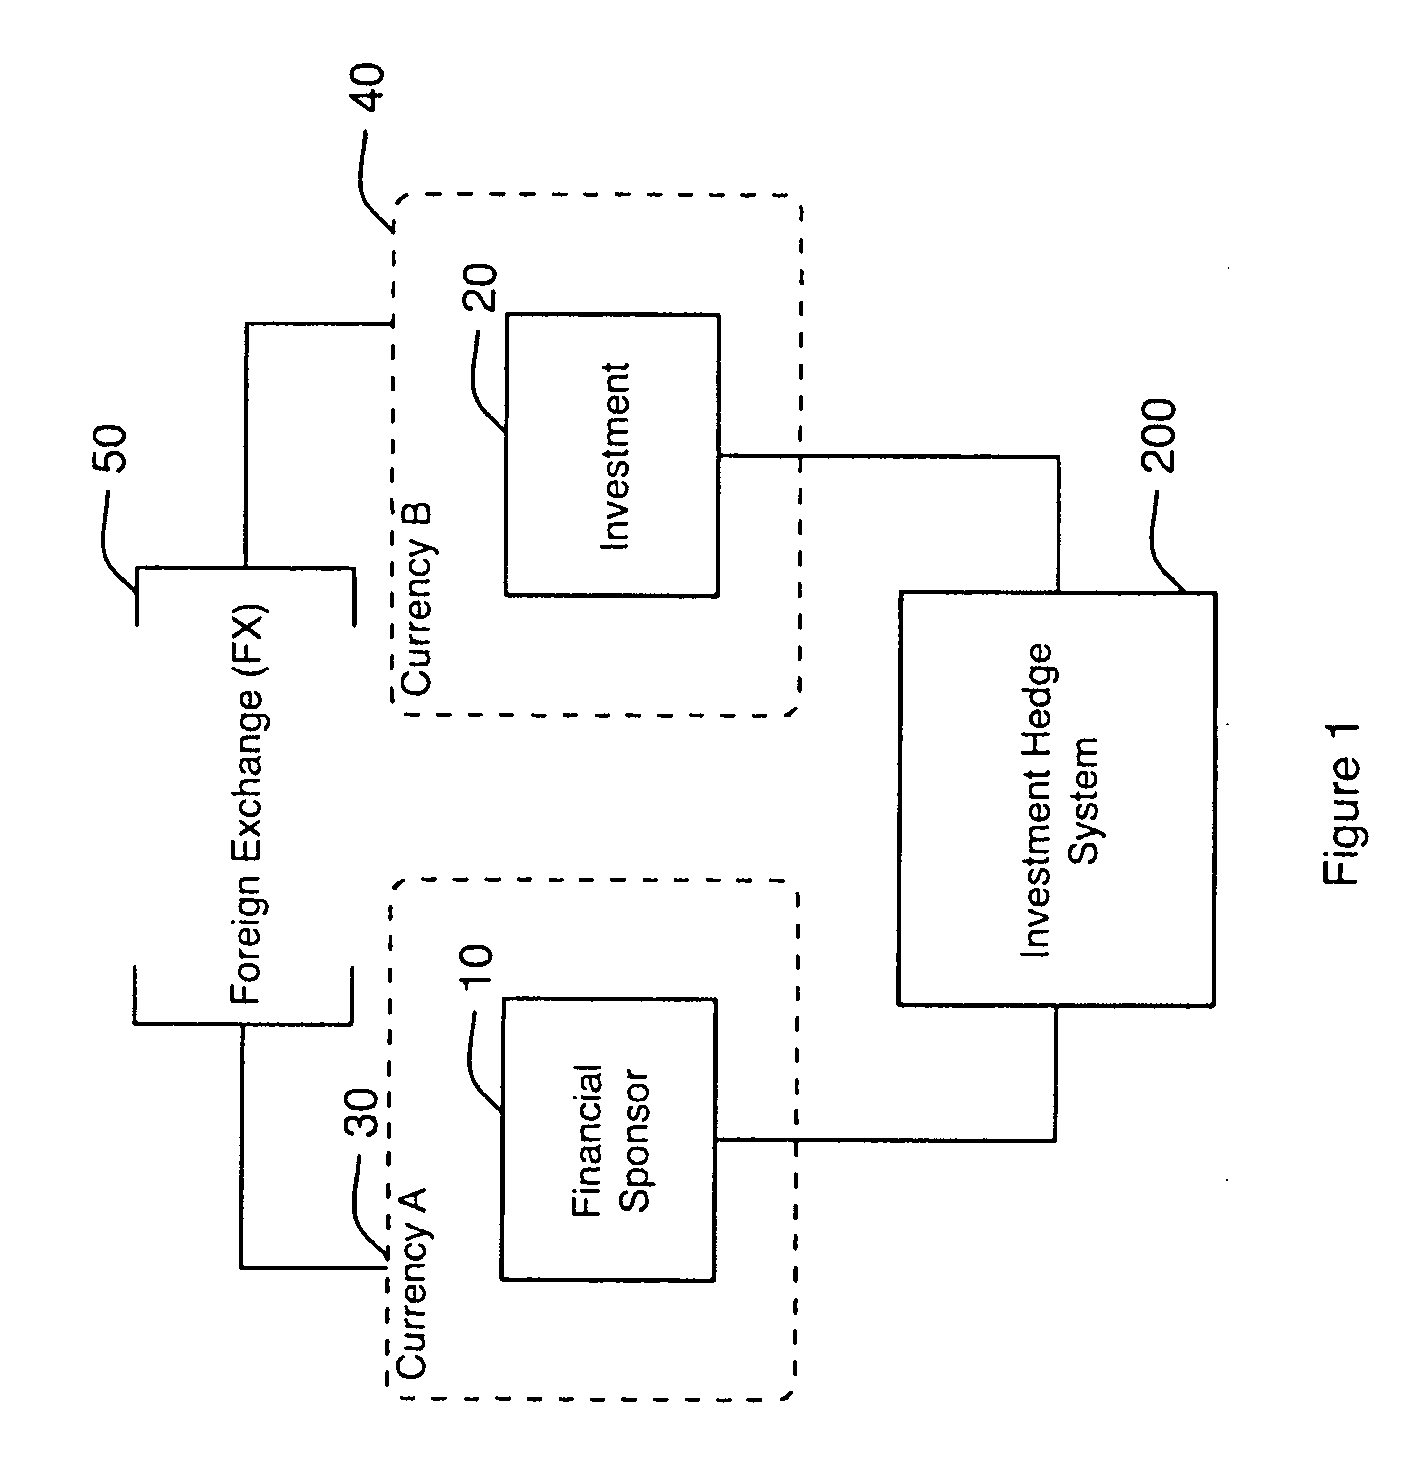 System and Method for Contingent Equity Return Forward to Hedge Foreign Exchange Risk in Investments Having Varying Exit Parameters